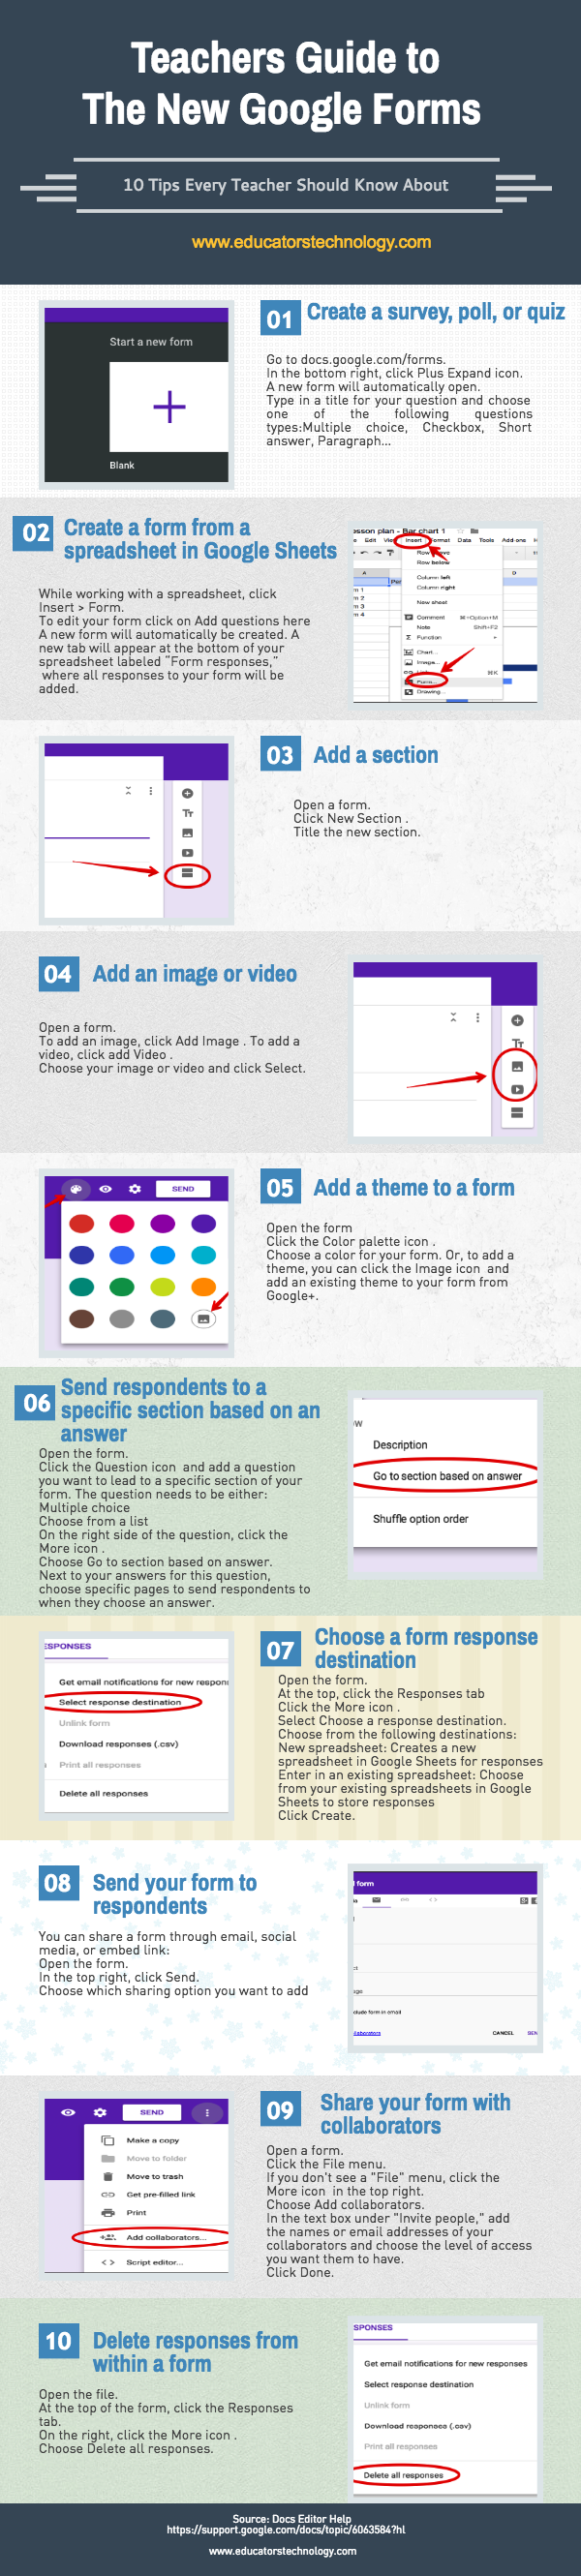 Teachers Visual Guide to The New Google Forms